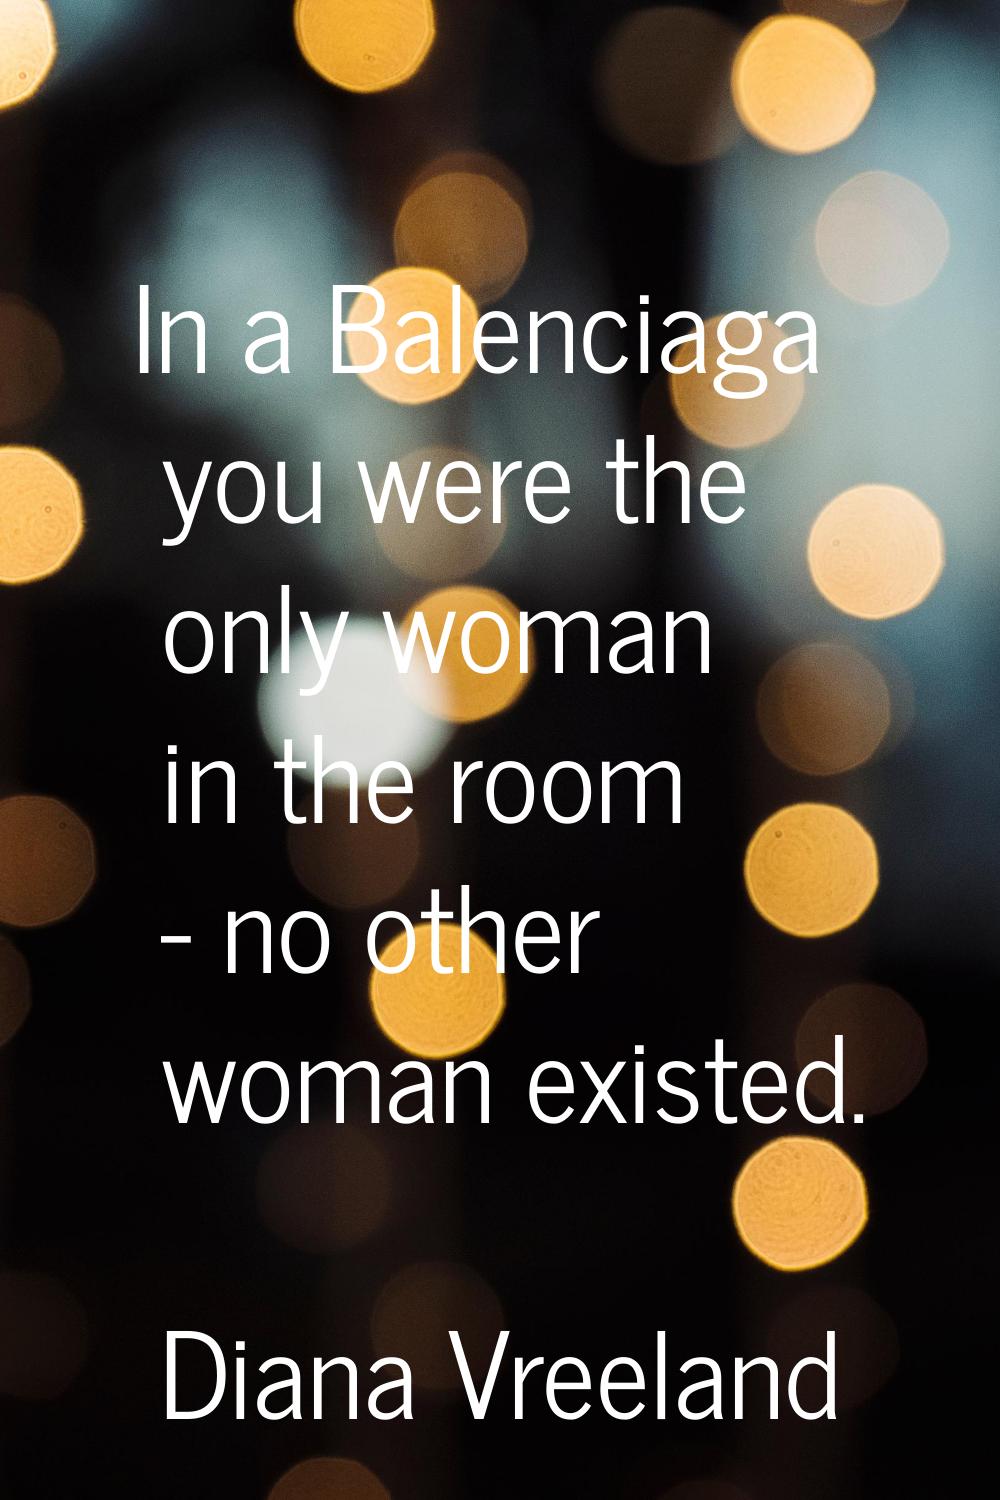 In a Balenciaga you were the only woman in the room - no other woman existed.